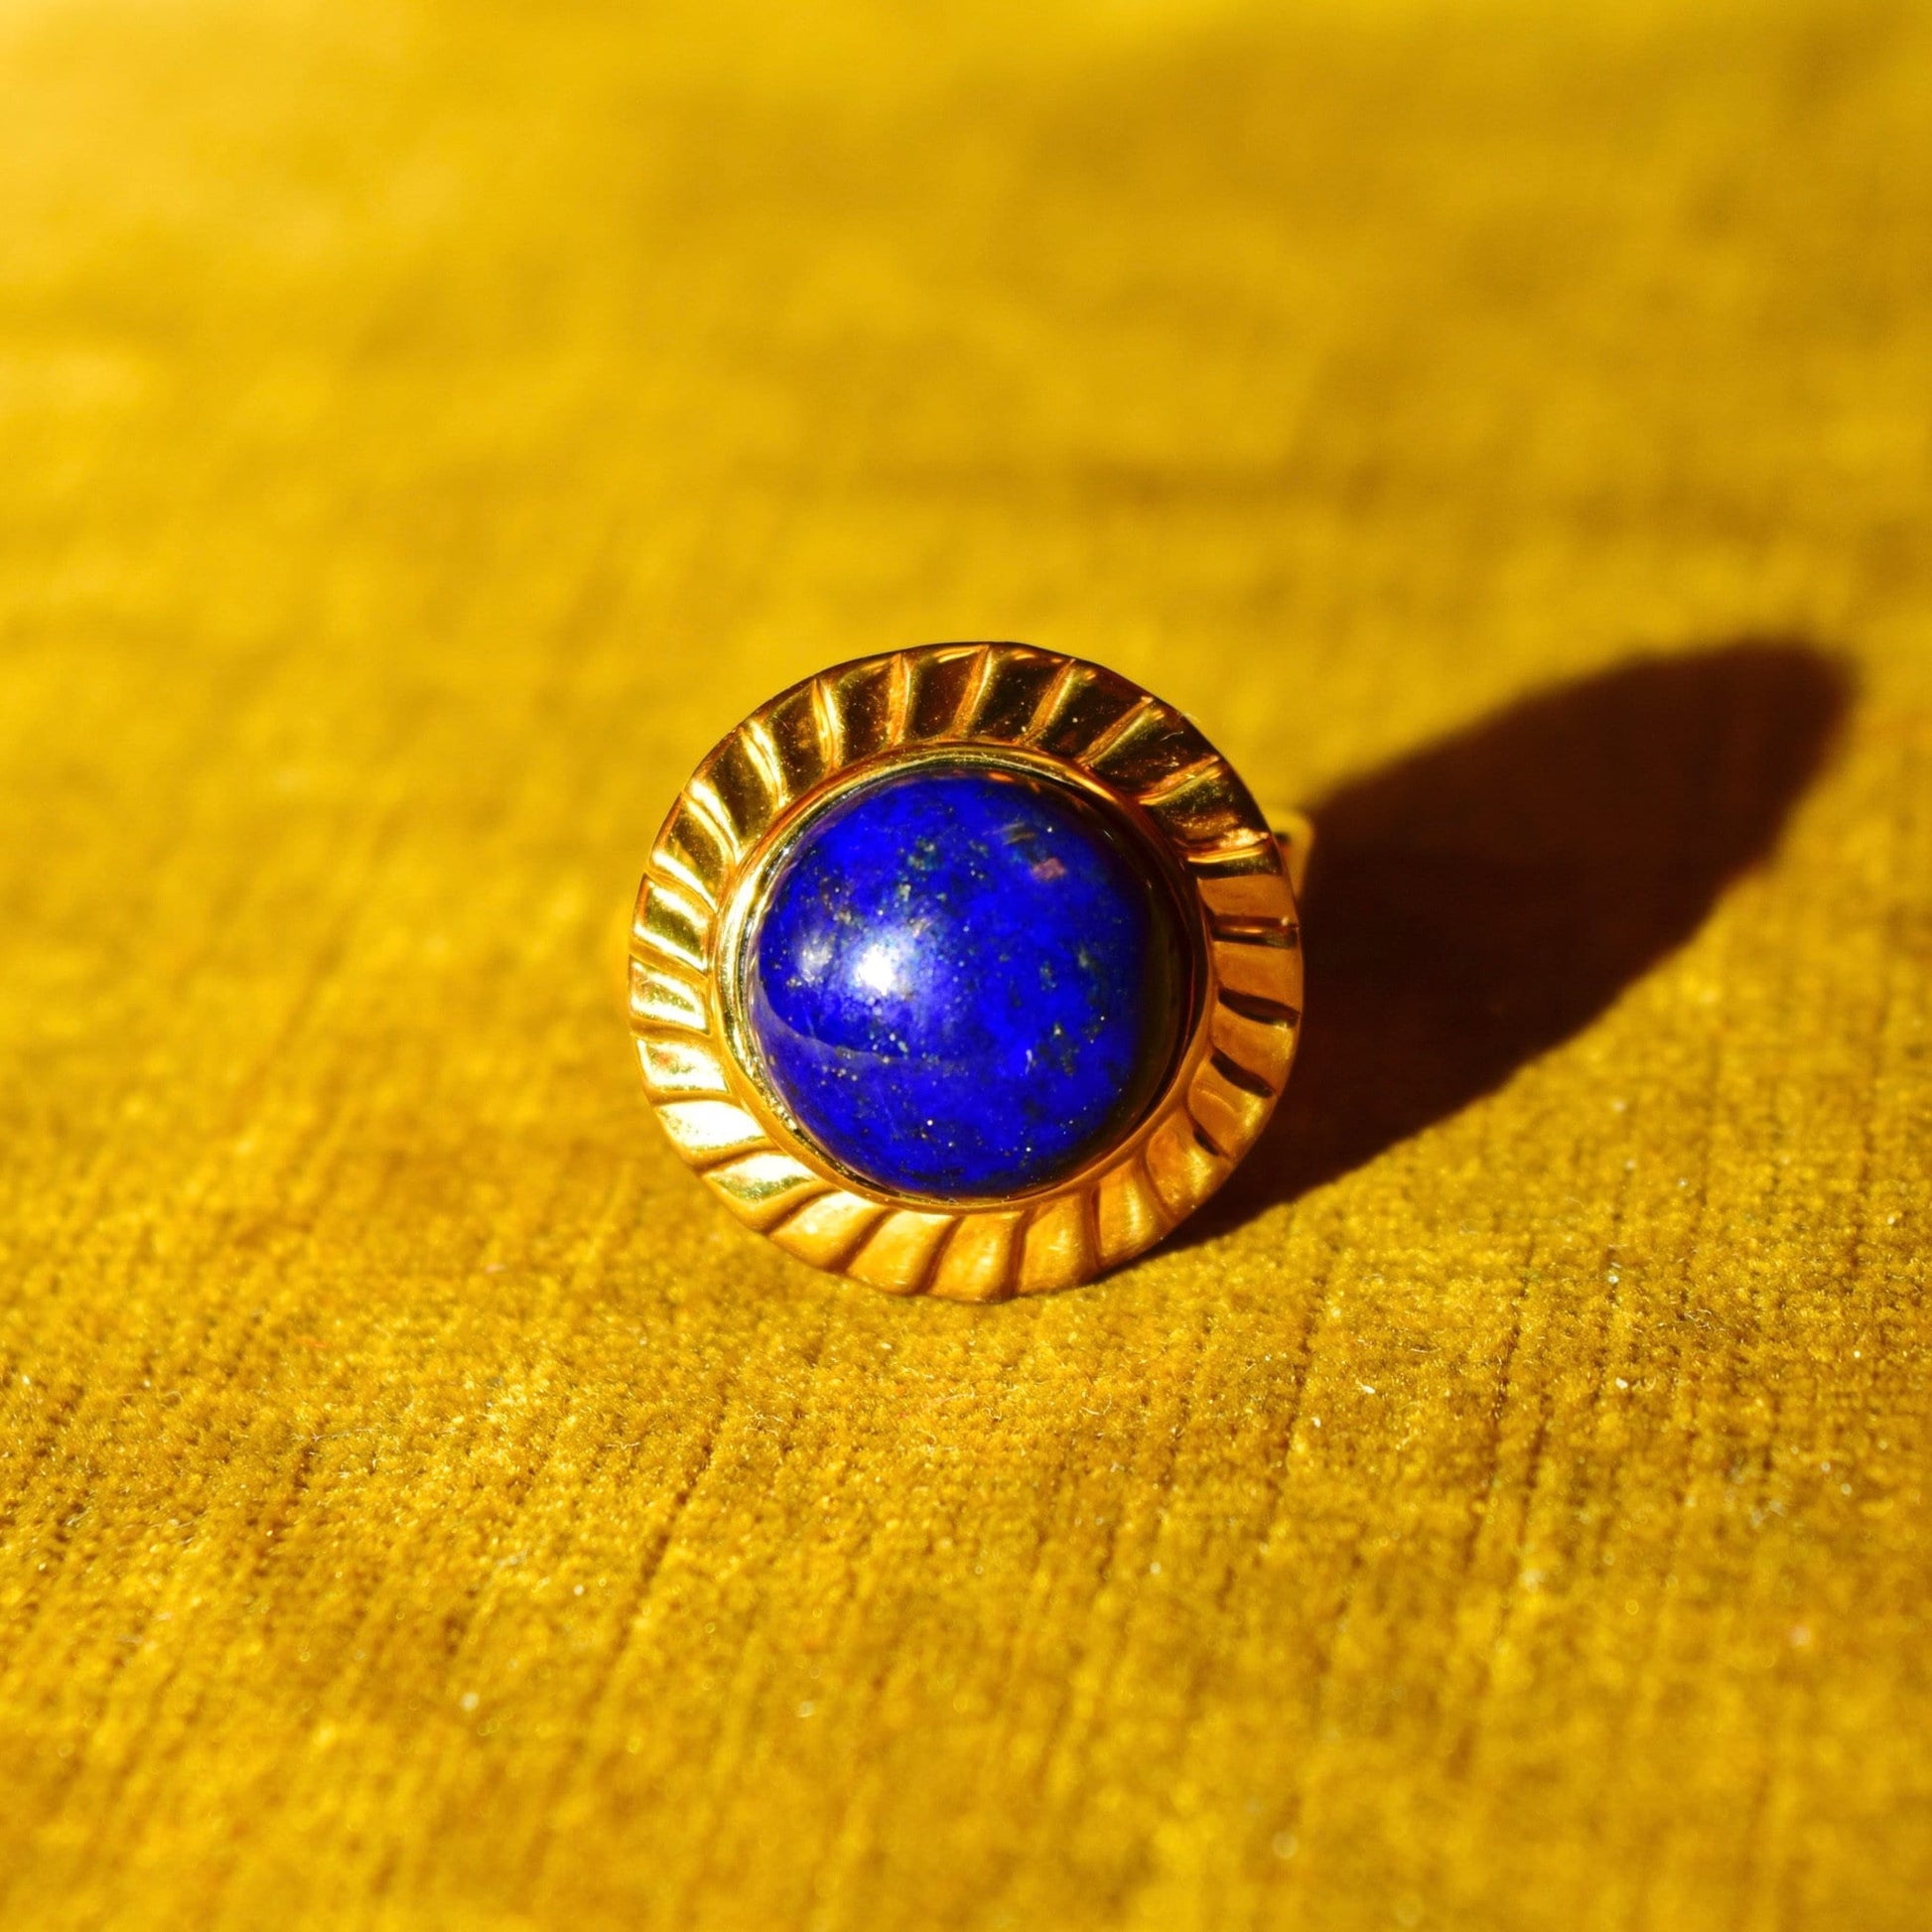 14K yellow gold cocktail ring featuring a vibrant cobalt blue lapis lazuli cabochon gemstone set in a fluted hollow band, sized 7 1/2 US, showcased on a textured golden fabric background